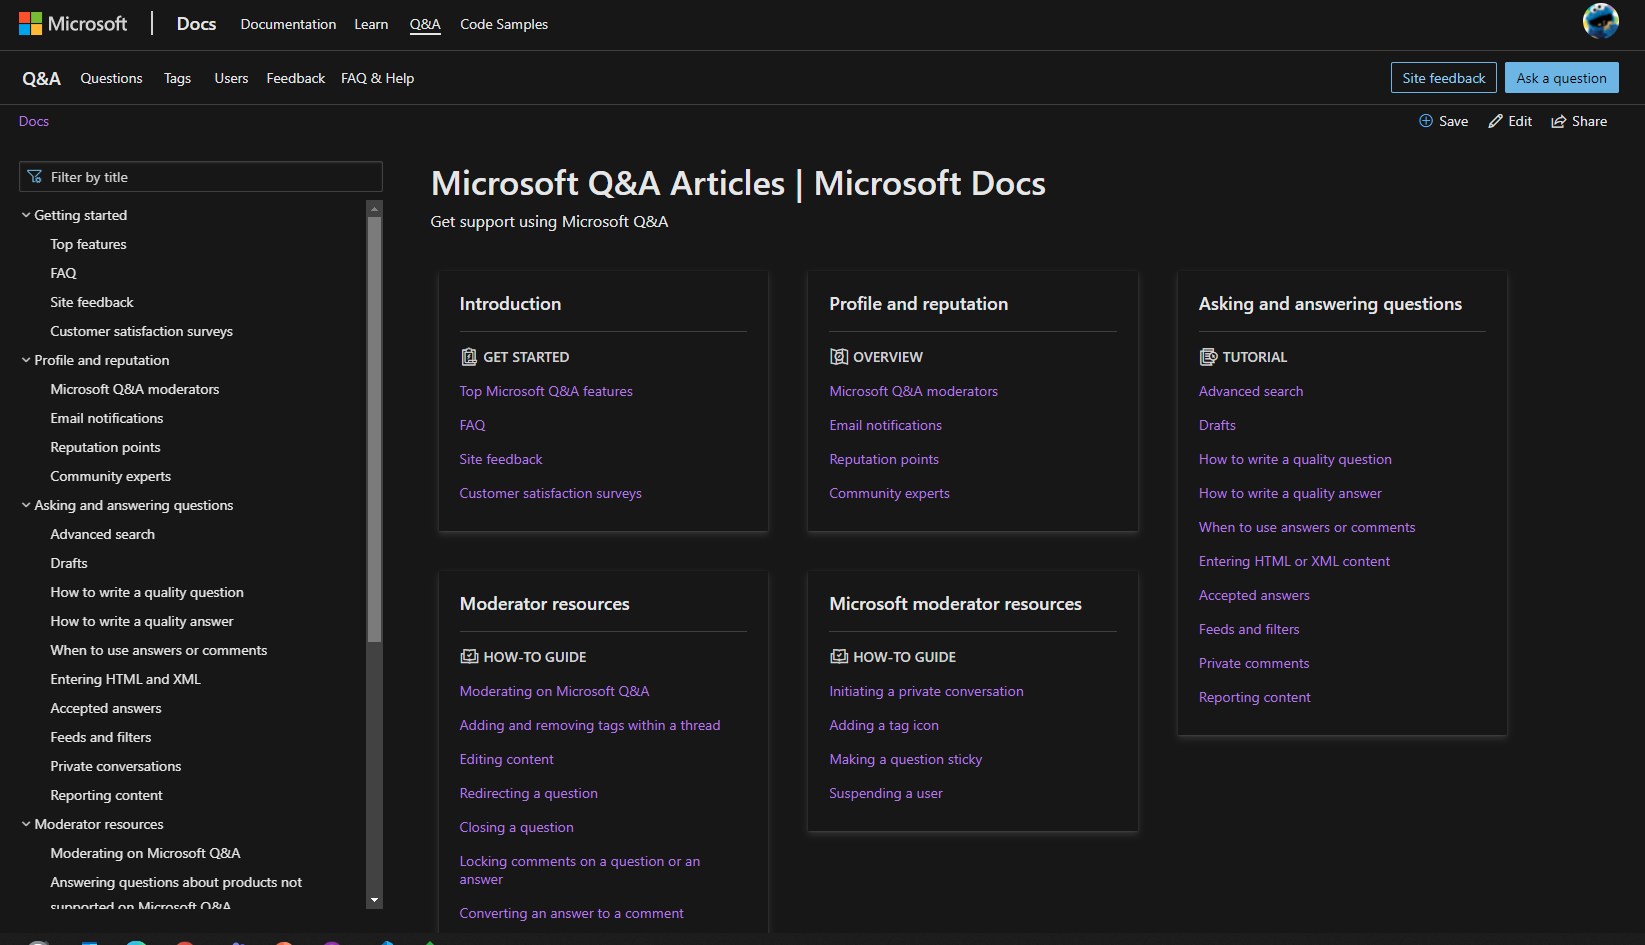 Home page for the Q&A help articles in Docs